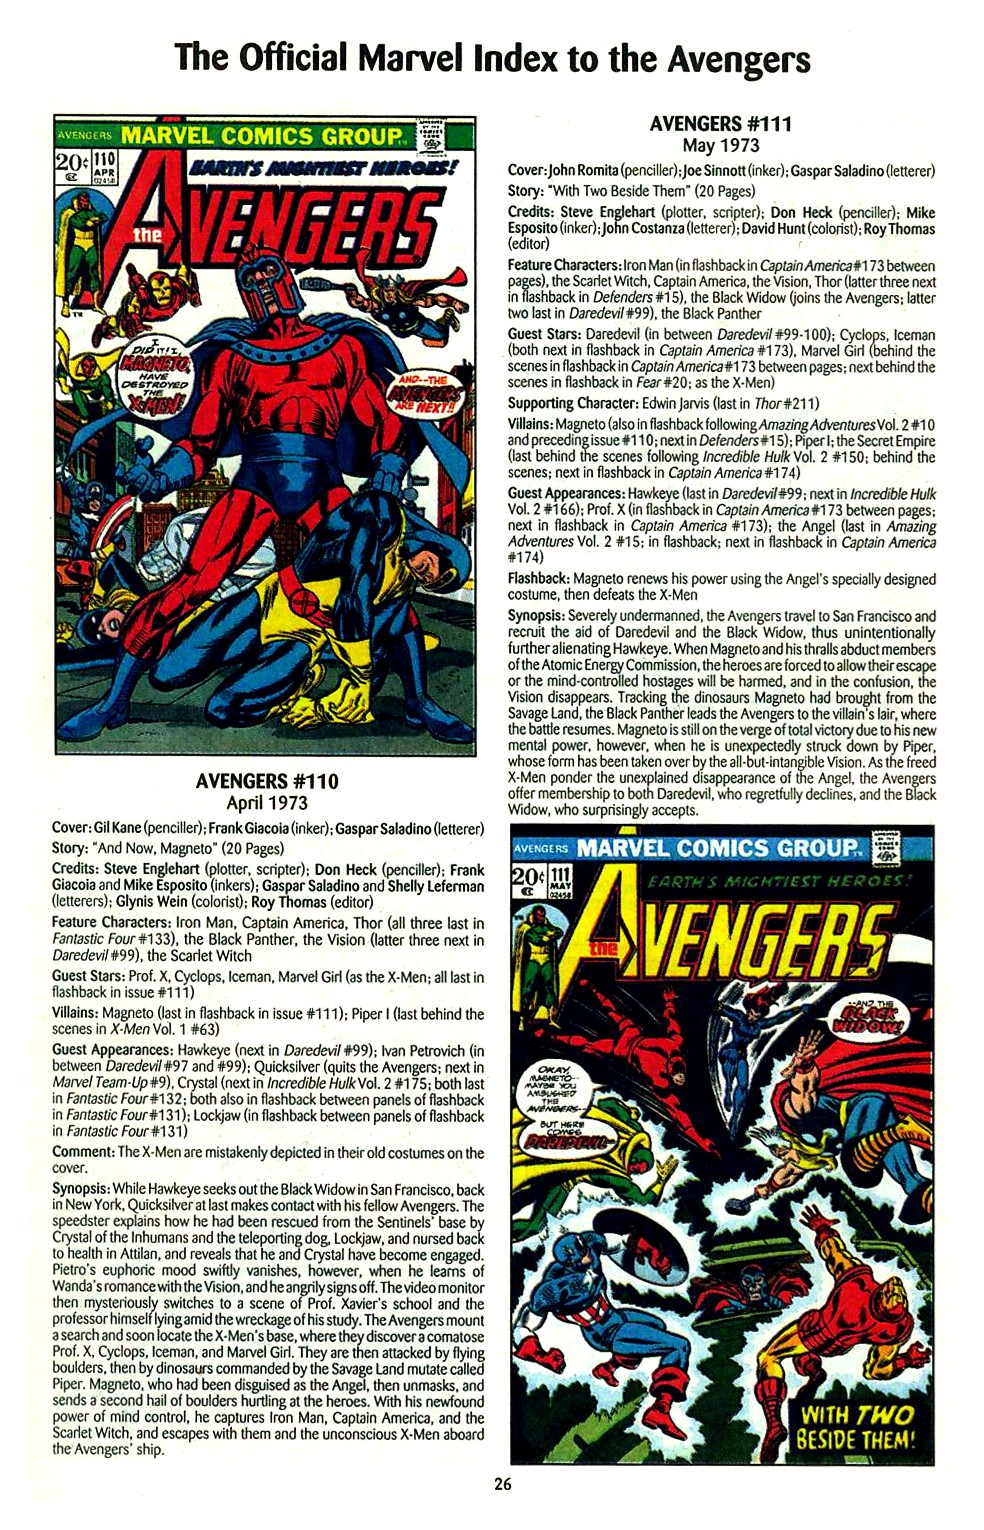 Read online The Official Marvel Index to the Avengers comic -  Issue #2 - 28